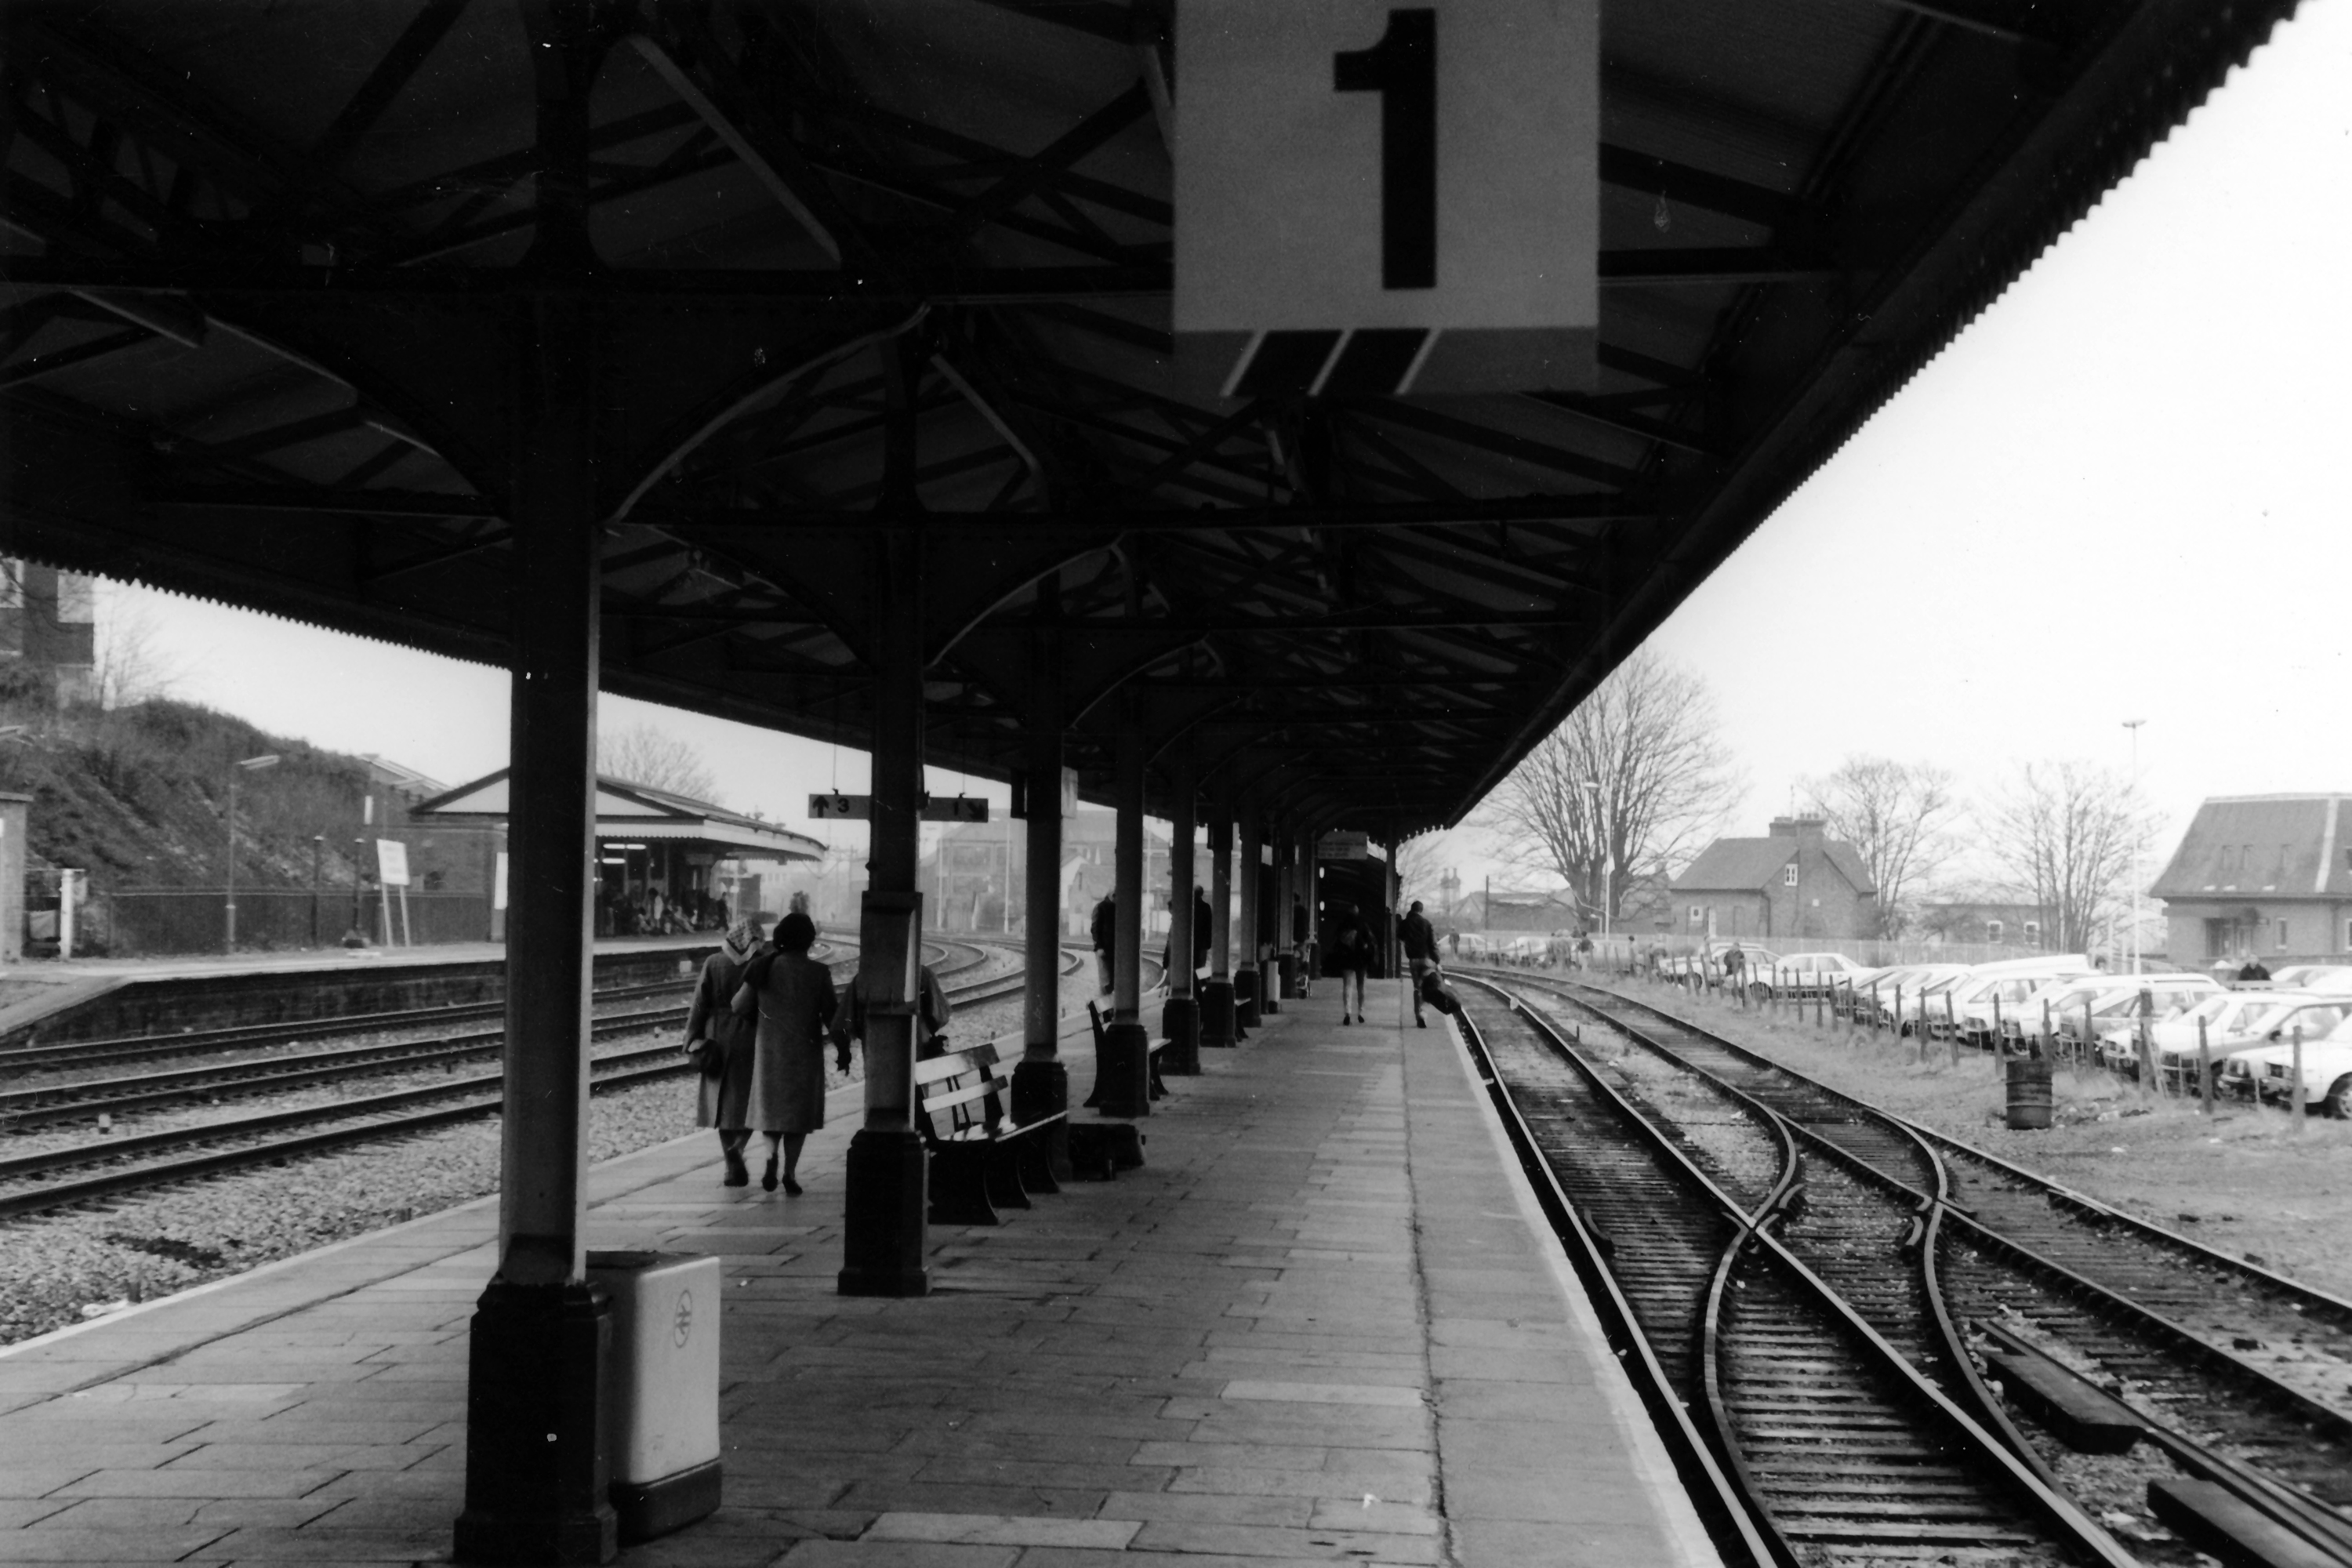 The view along platforms 1 and 2 at High Wycombe looking towards London